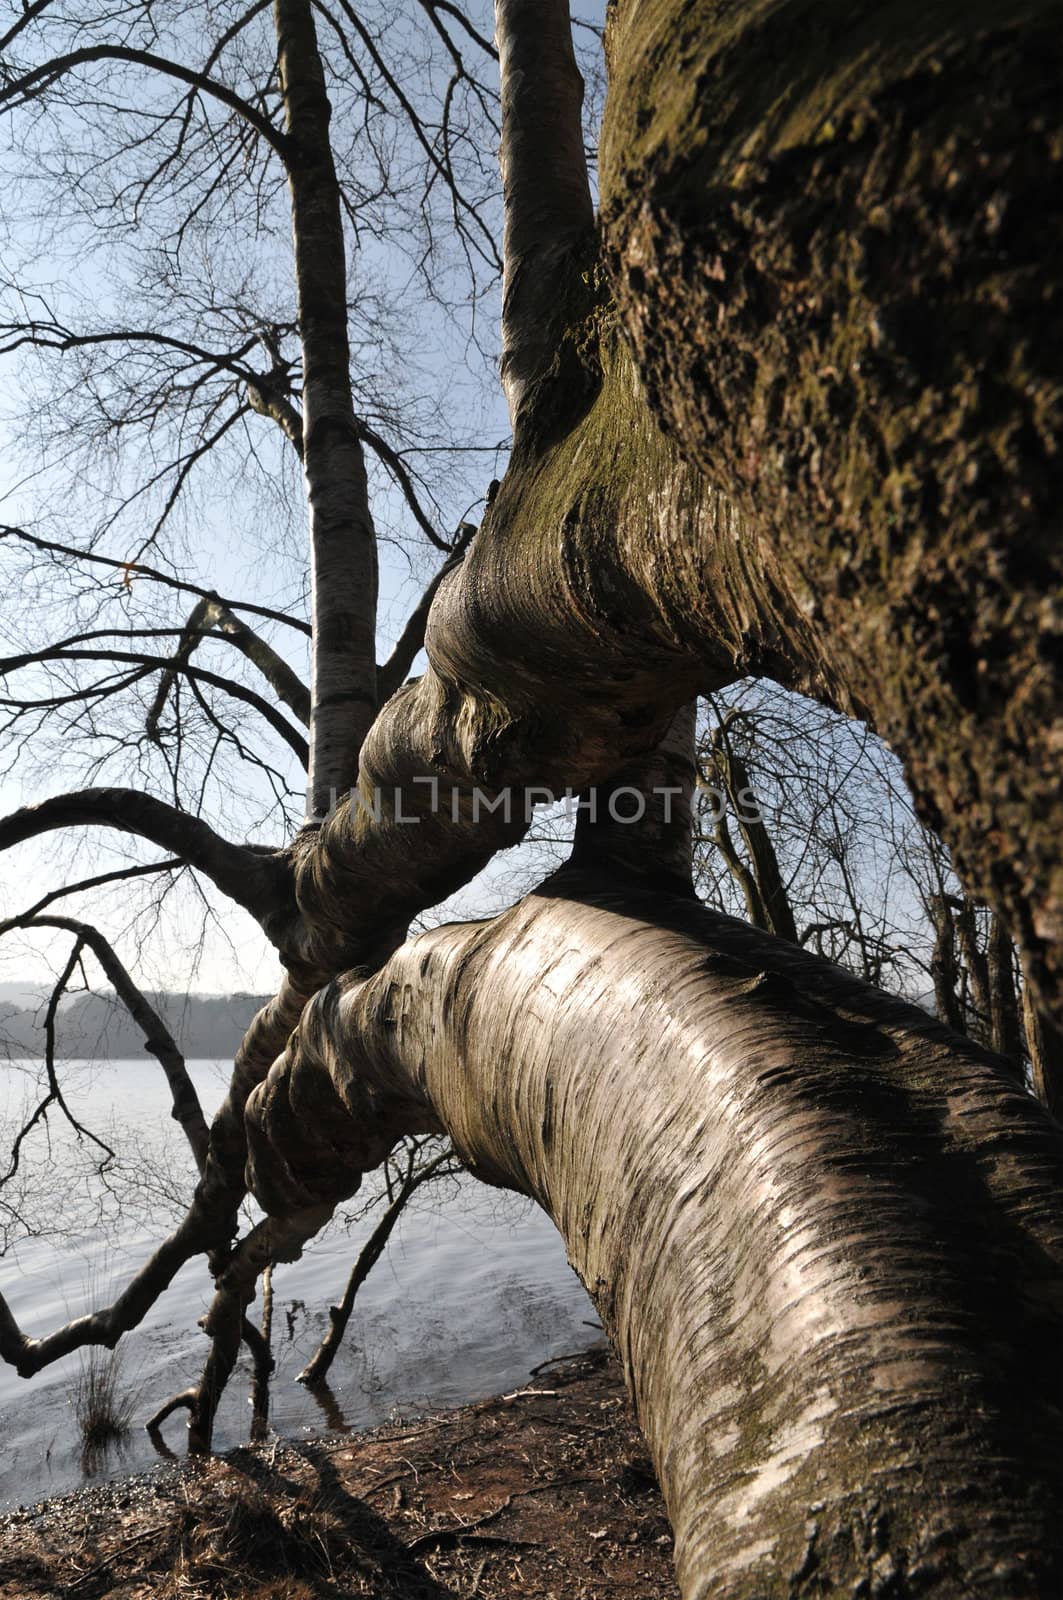 Curved Trunk along a Lake in the Broceliande Forest